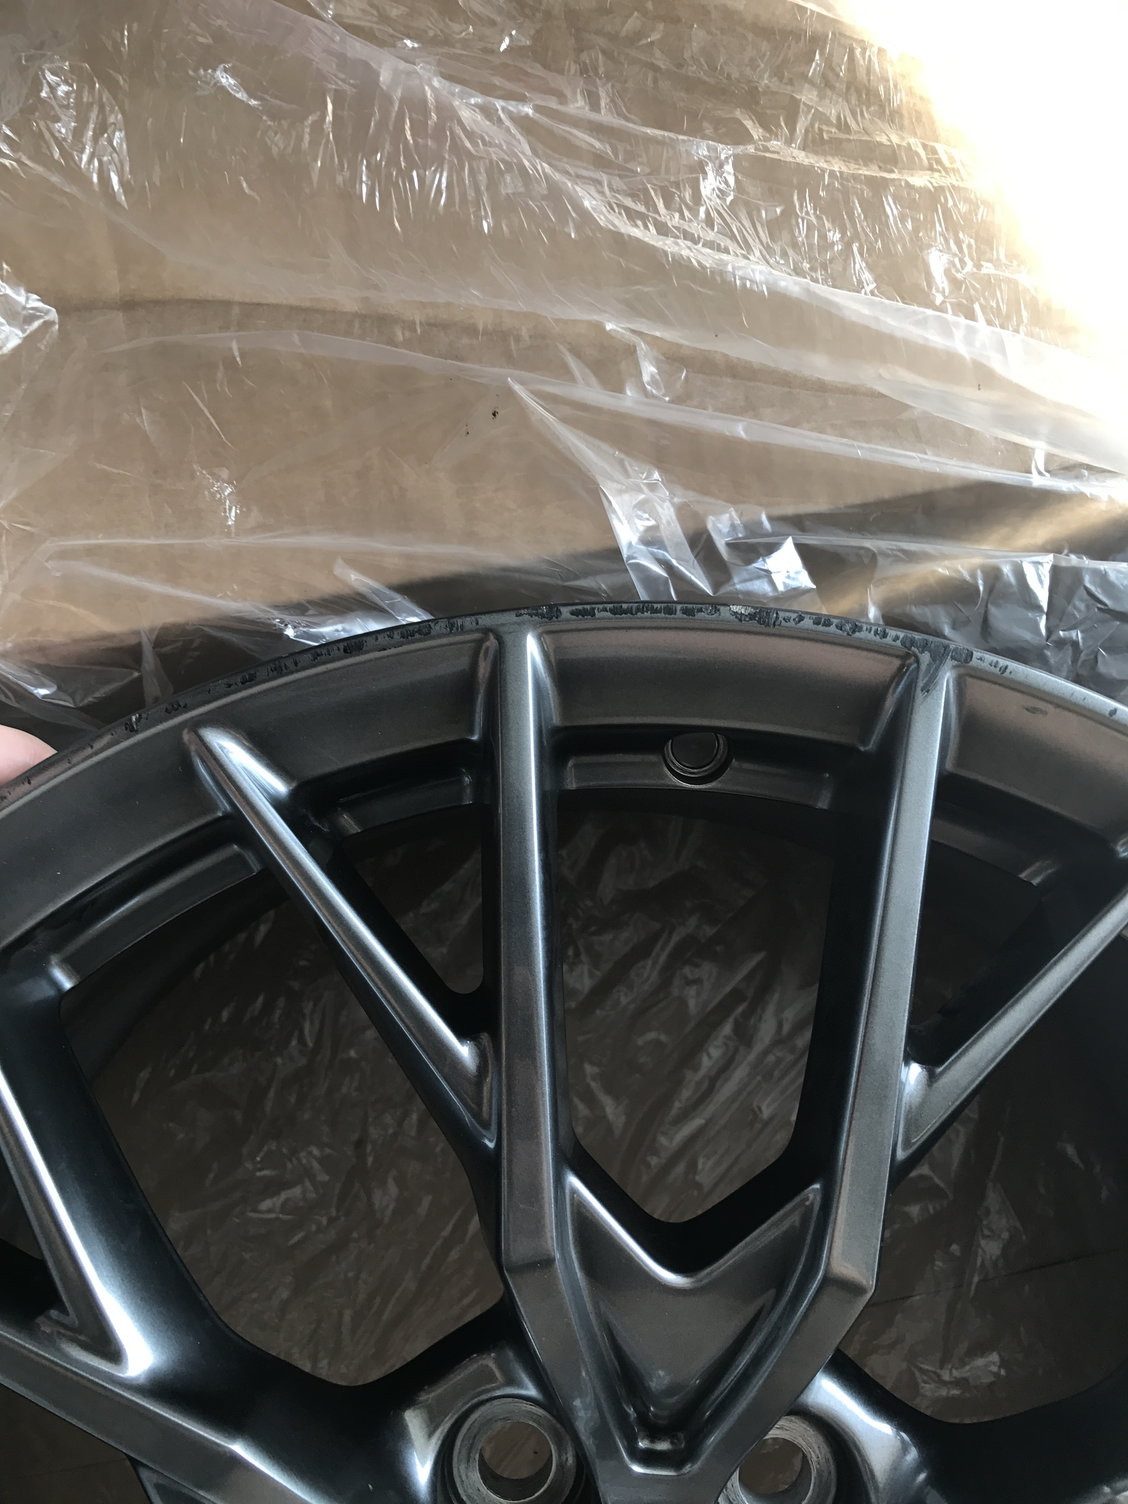 Wheels and Tires/Axles - Fs oem factory gsf wheels all fronts 4(19x9) wheels!!! - Used - 2016 to 2018 Lexus GS F - Huntington Beach, CA 92649, United States